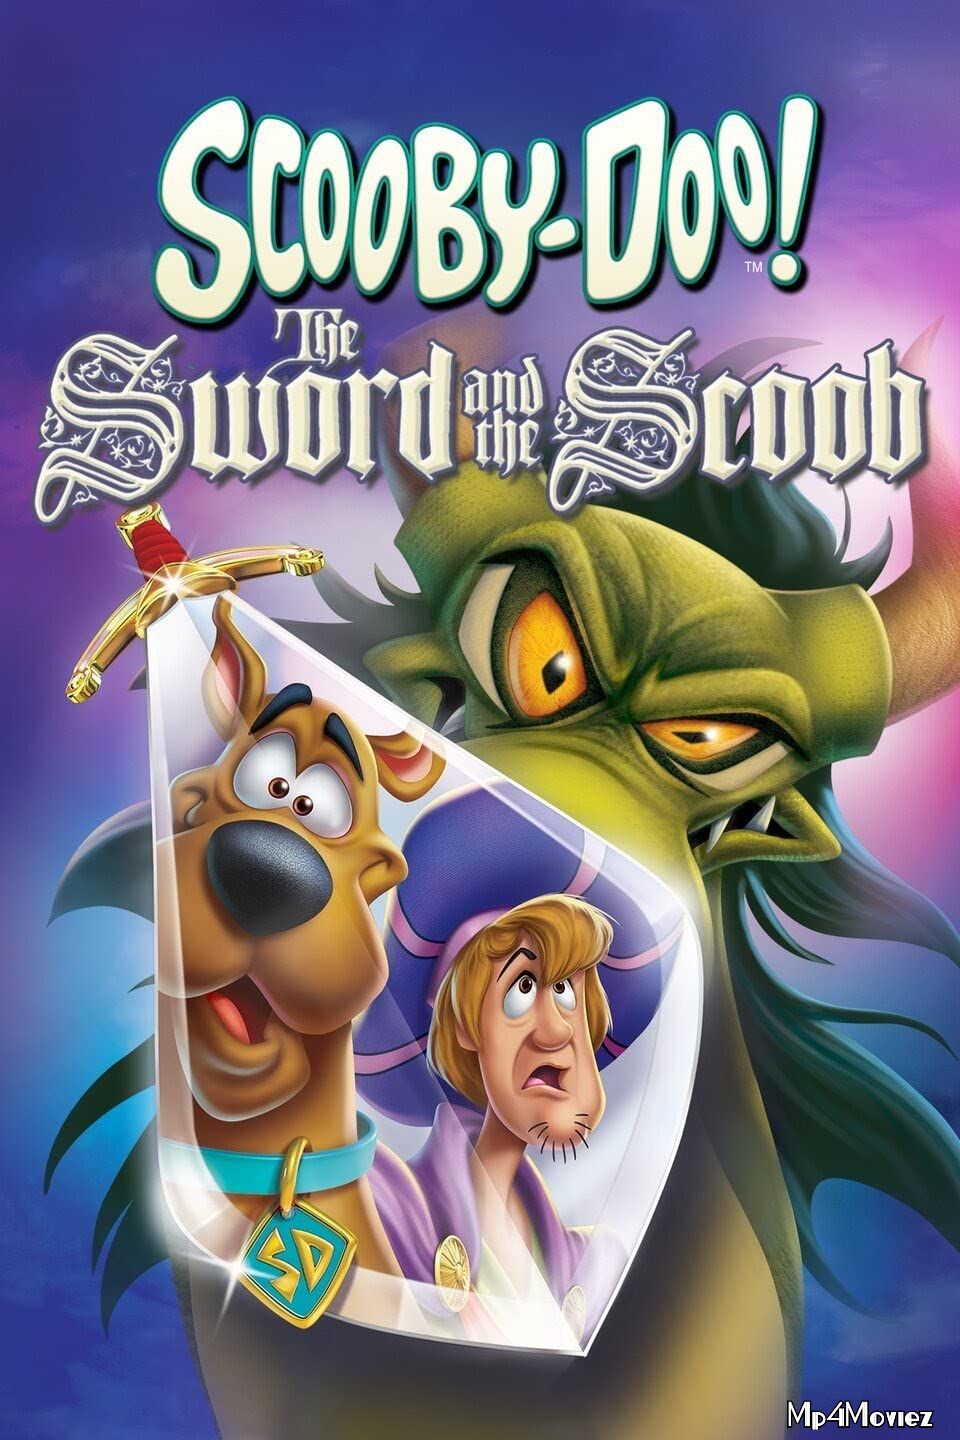 Scooby-Doo The Sword and the Scoob (2021) Hollywood Full Movie download full movie